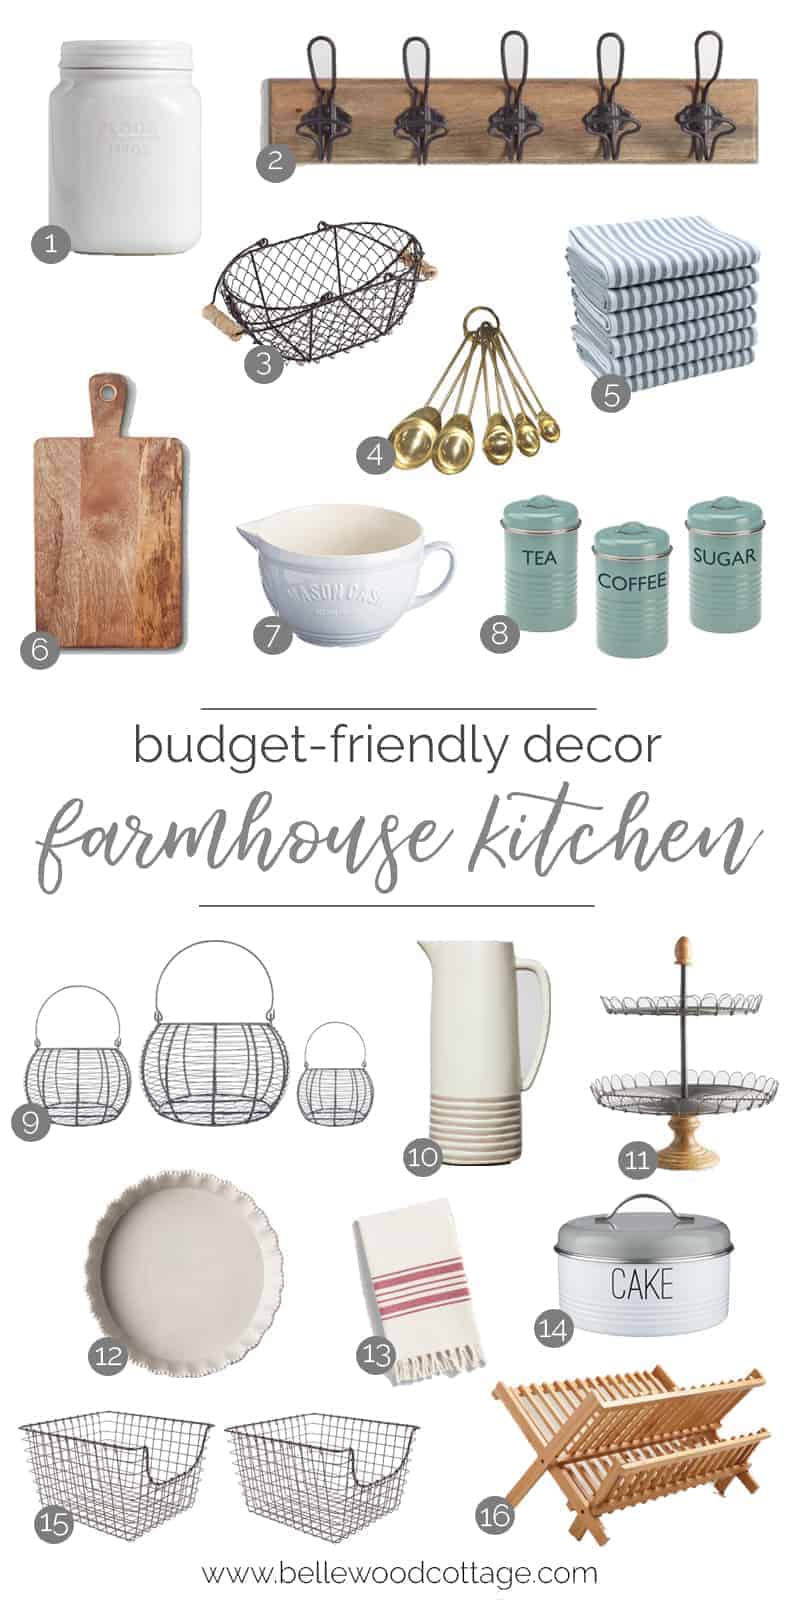 Not ready to commit to a full kitchen remodel? Join me as I share some of my favorite farmhouse kitchen decor that will transform your space quickly and easily. No power tools required! From BellewoodCottage.com